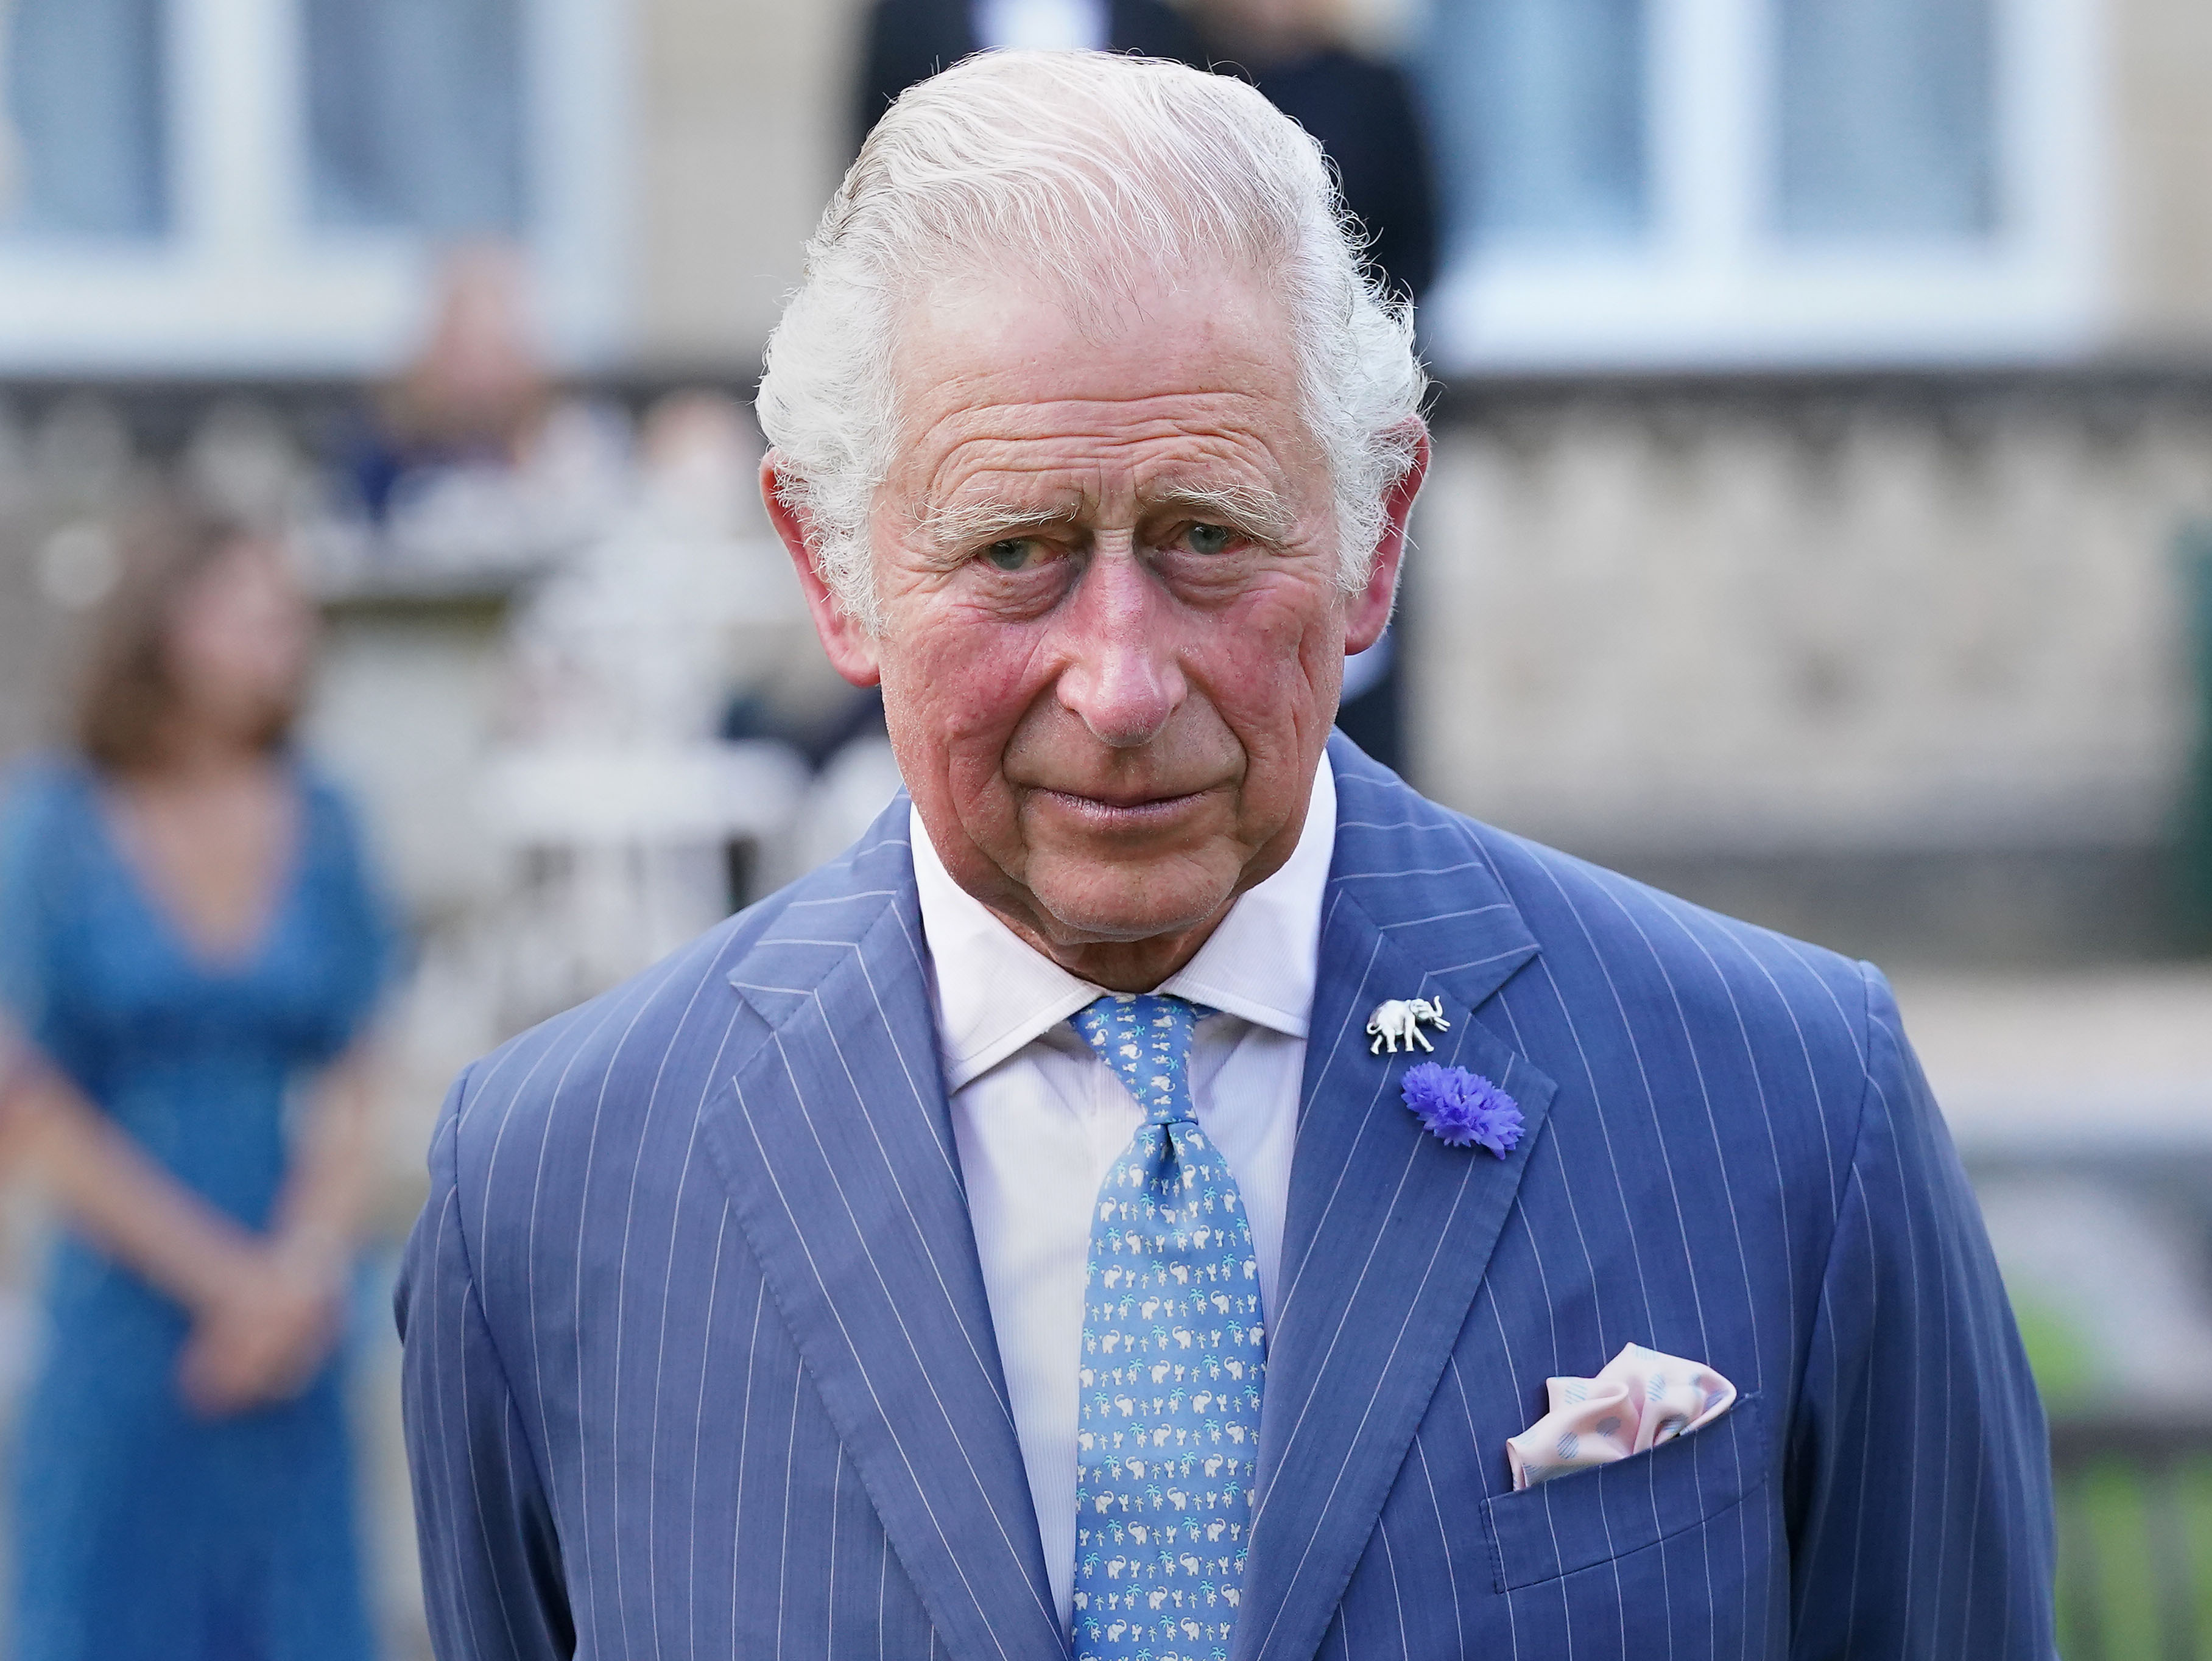 King Charles III at Lancaster House in London, England on July 14, 2021 | Source: Getty Images